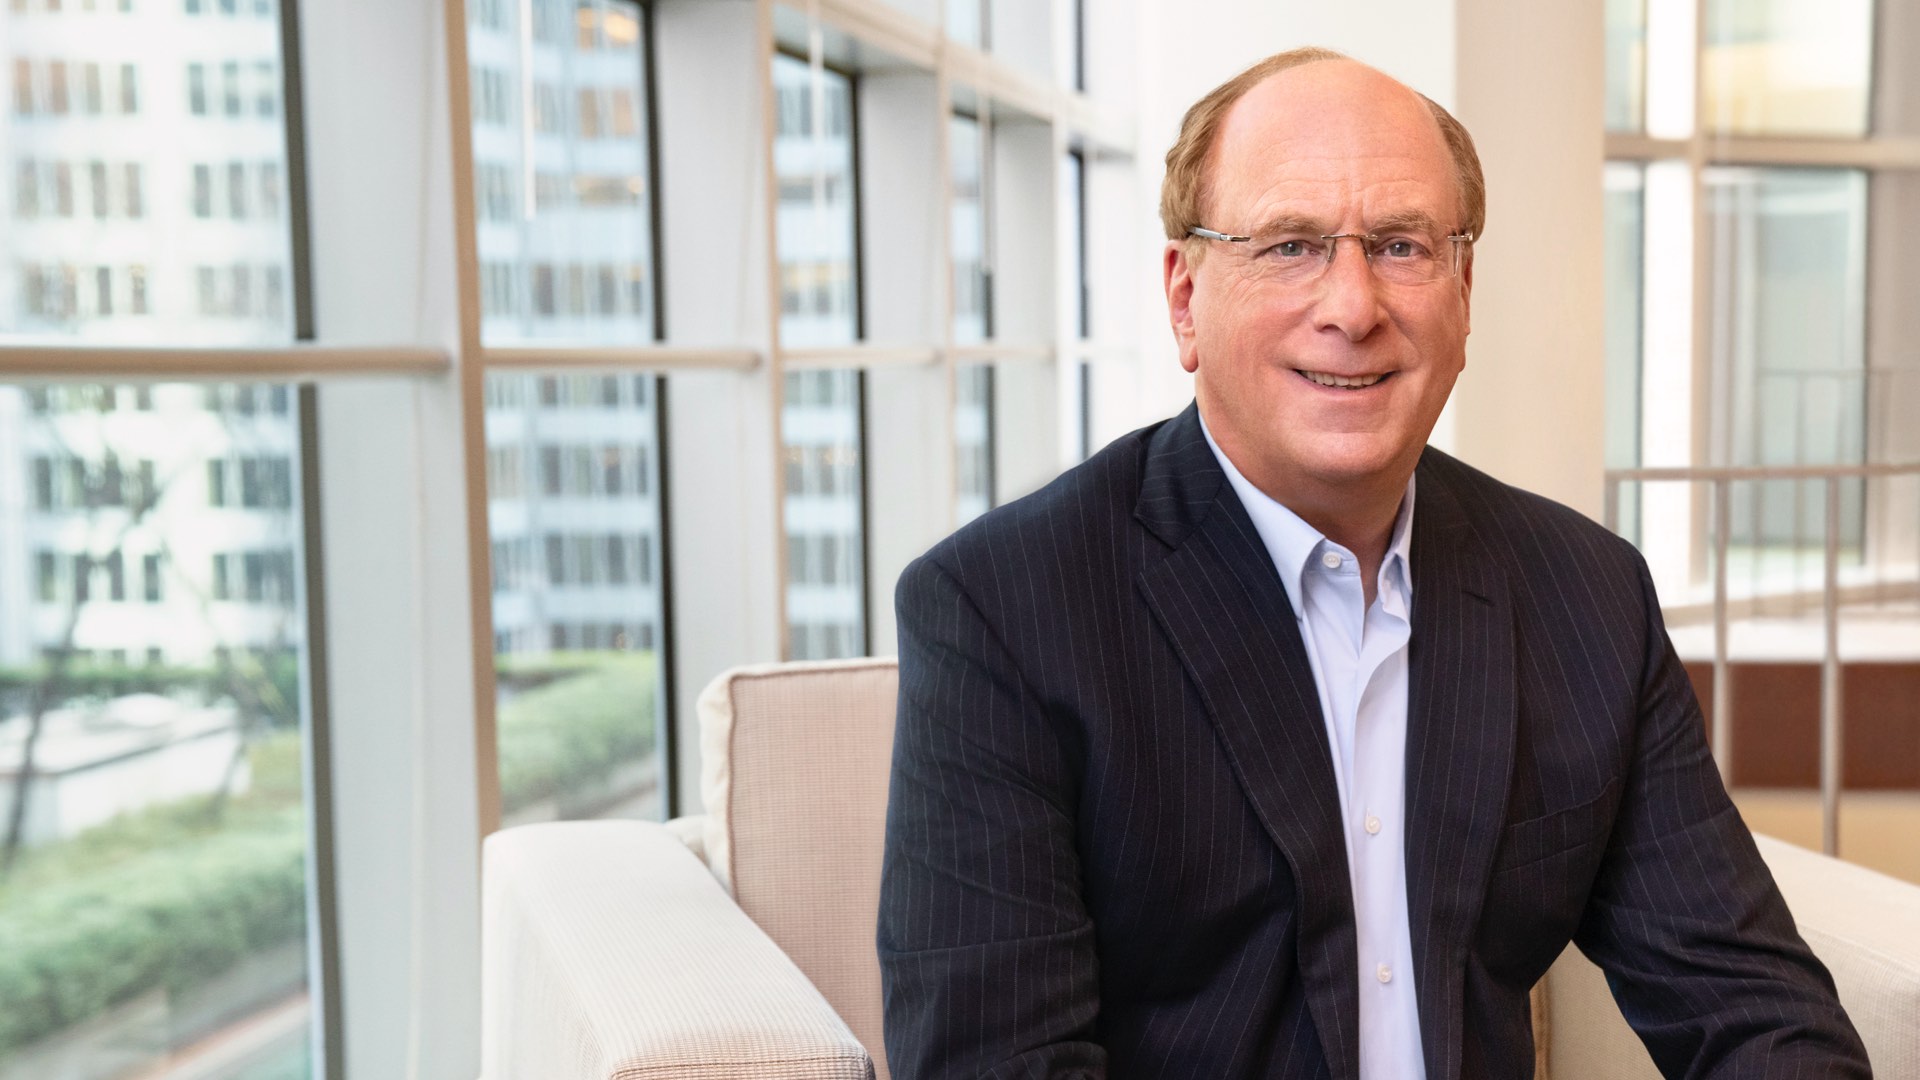 A photo of Larry Fink, BlackRock’s Chairman and CEO